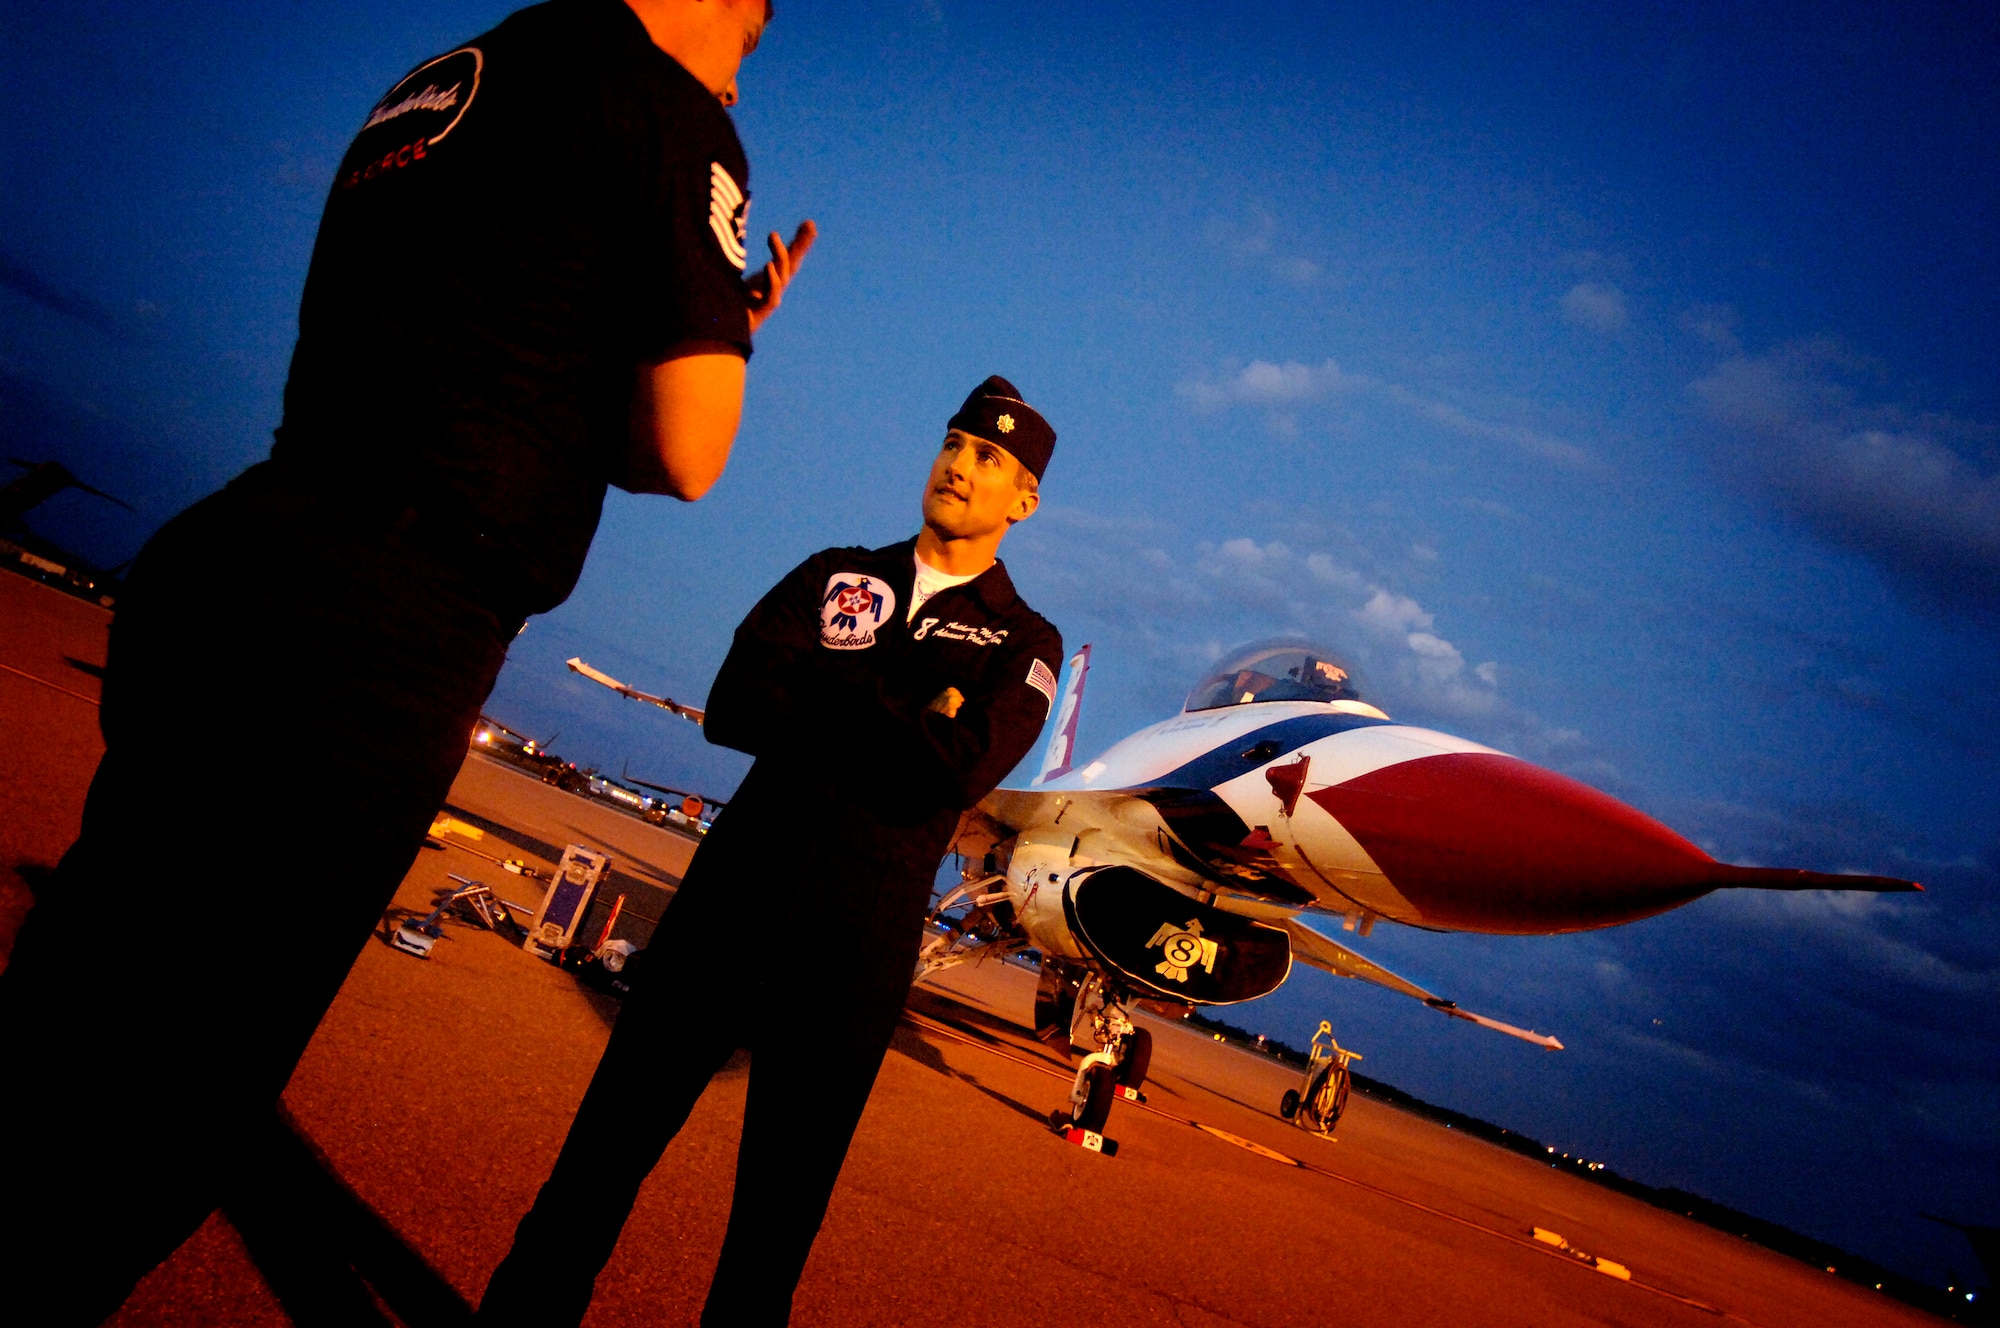 Tech. Sgt.David Batterson and Maj. Anthony Mulhare prepare to leave Thunderbird Eight parked overnight on the Charleston AFB flightline Sunday. Sergeant Batterson is a crew chief with the Thunderbirds advance team and Major Mulhare is the pilot of Thunderbird Eight. The Thunderbirds will be performing at the "Wings Over Charleston" 2008 Air Show Saturday.  (U.S. Air Force photo/Senior Airman Nicholas Pilch) 